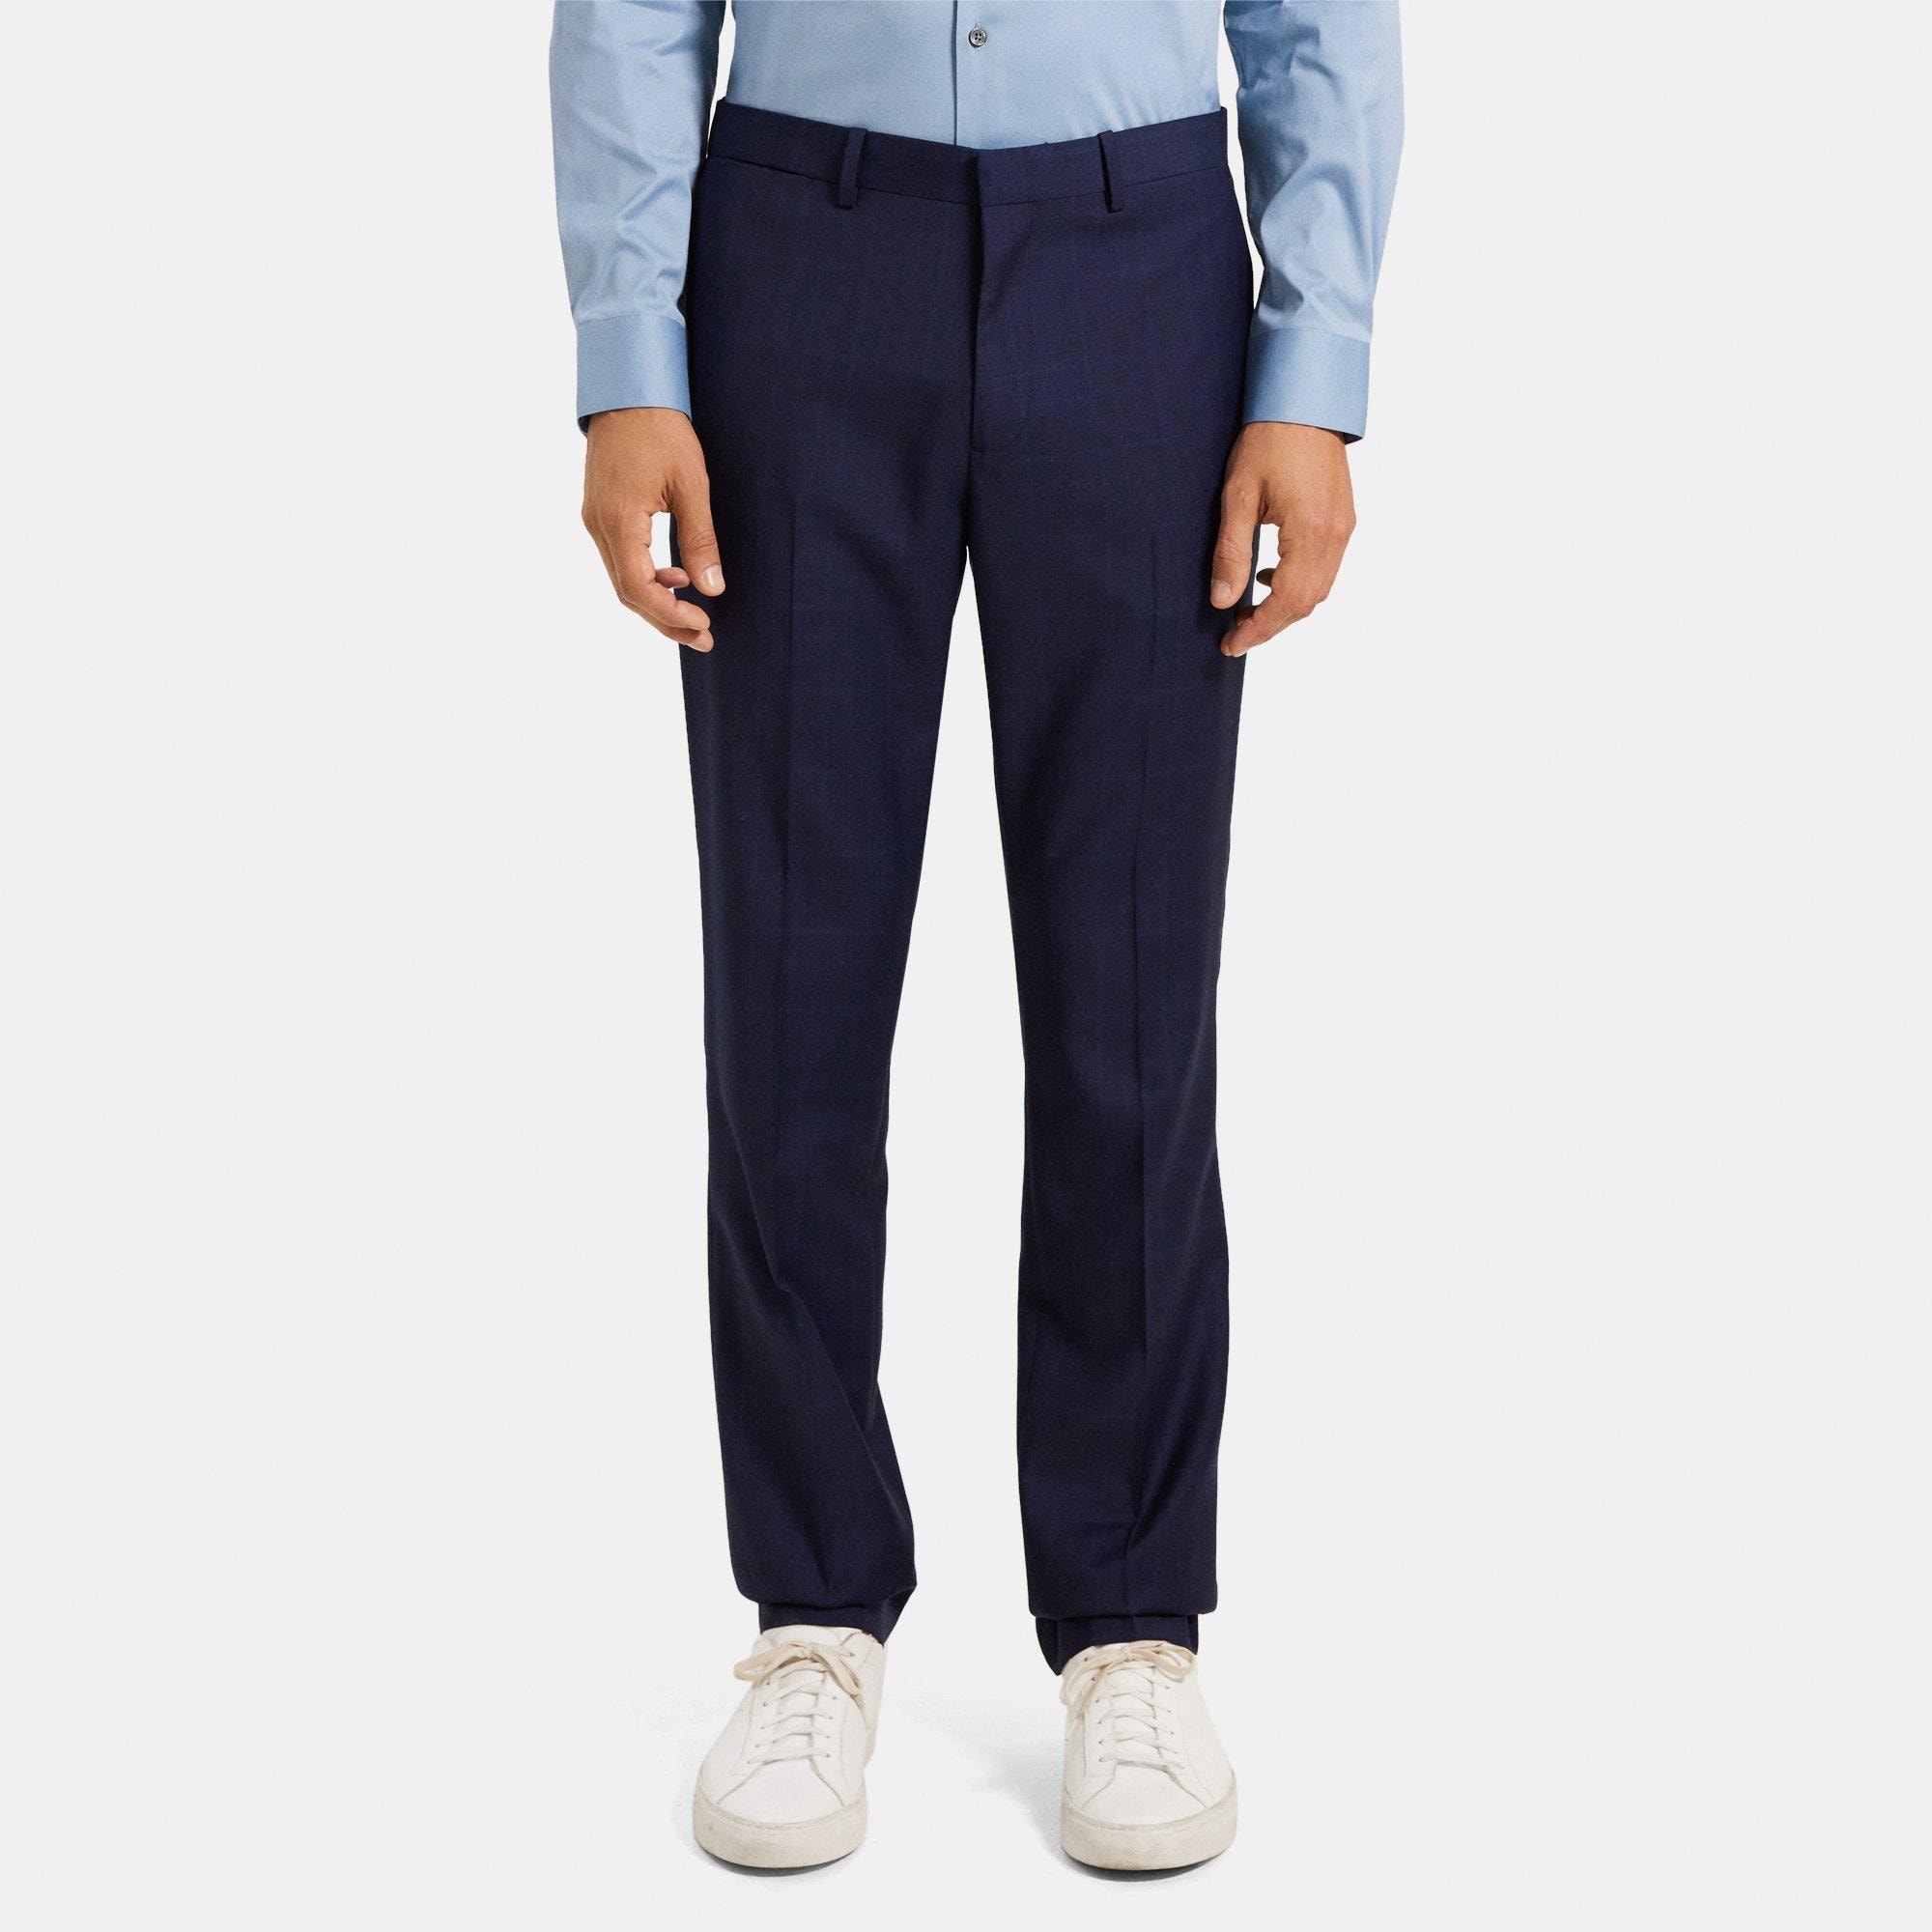 Theory Slim-Fit Suit Pant in Plaid Wool